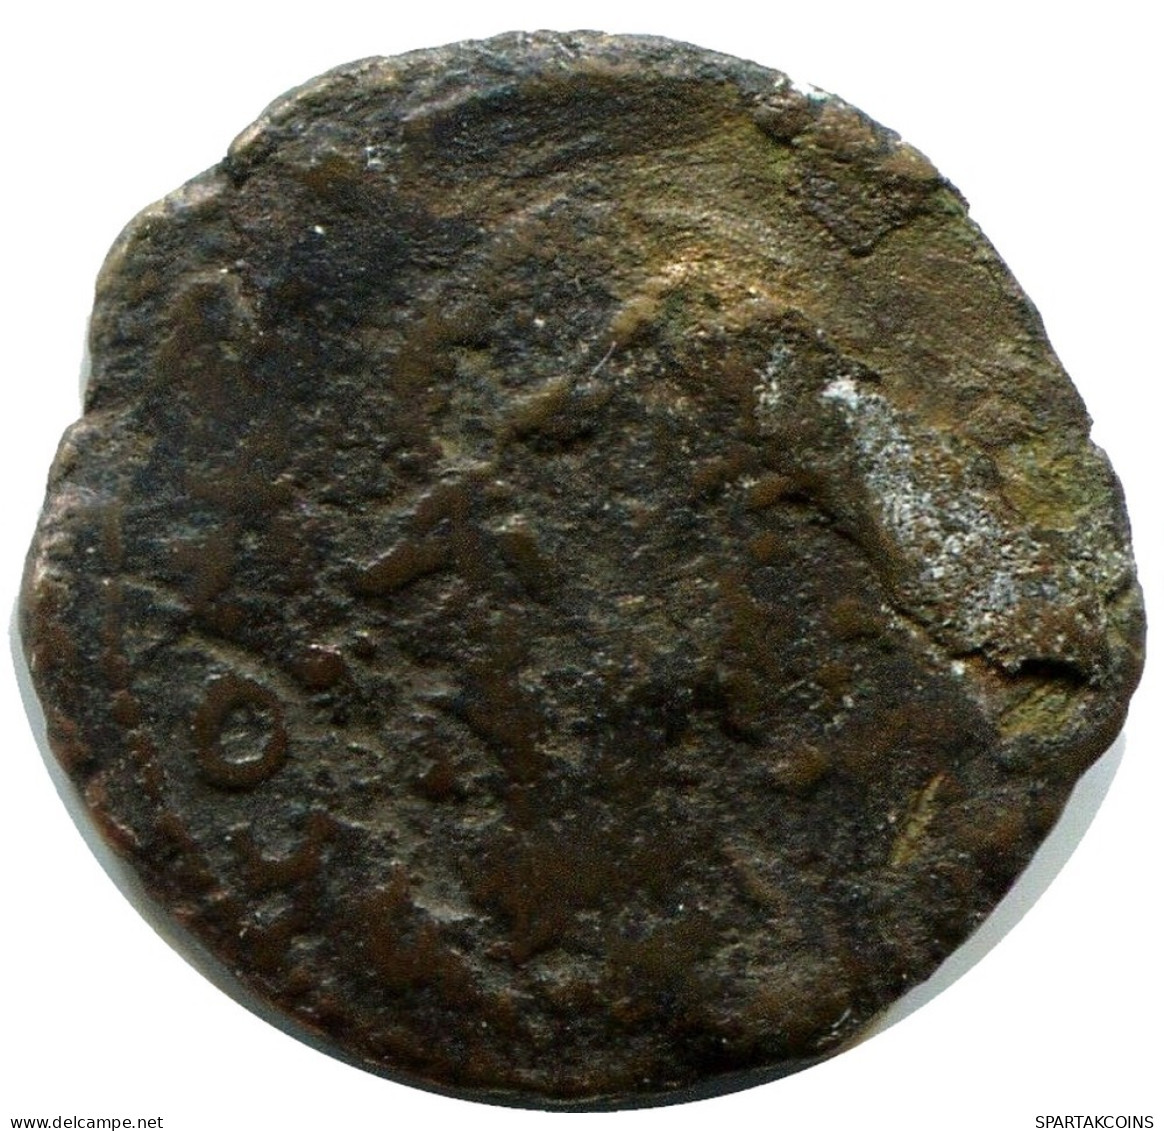 CONSTANS MINTED IN ALEKSANDRIA FOUND IN IHNASYAH HOARD EGYPT #ANC11385.14.F.A - The Christian Empire (307 AD Tot 363 AD)